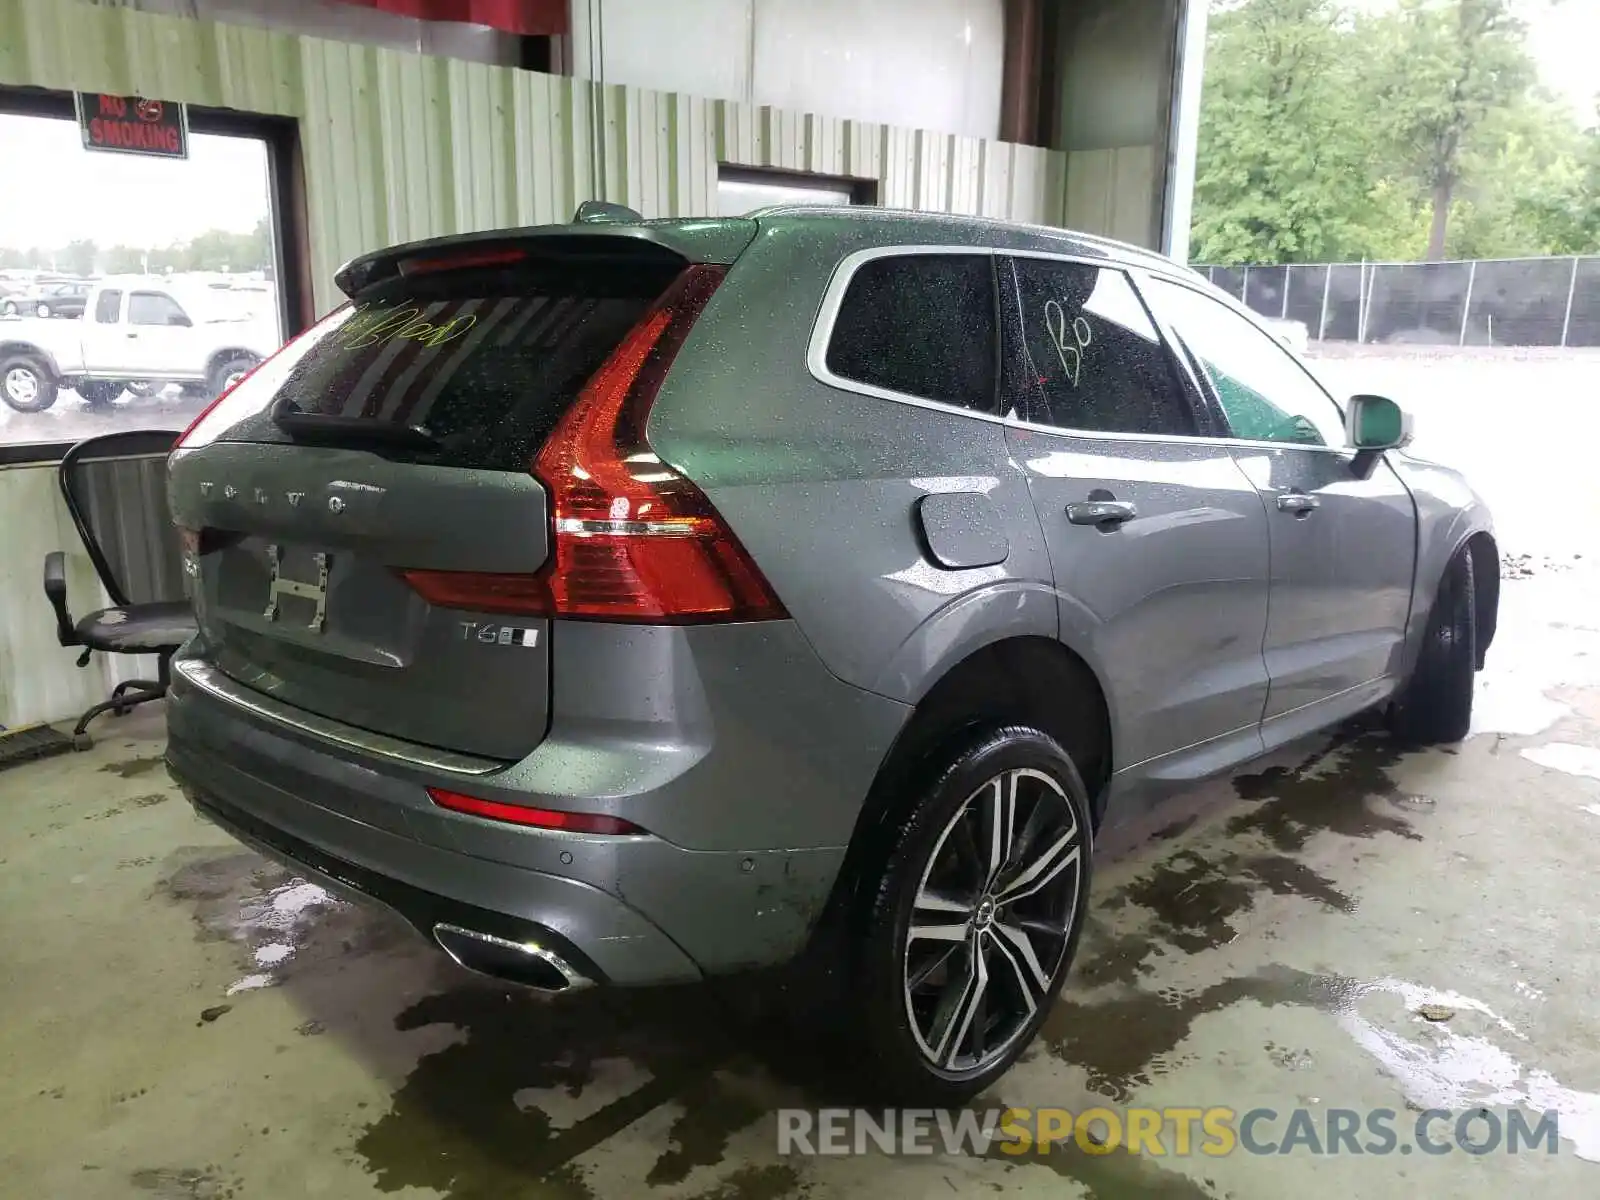 4 Photograph of a damaged car YV4A22RM9K1305006 VOLVO XC60 2019